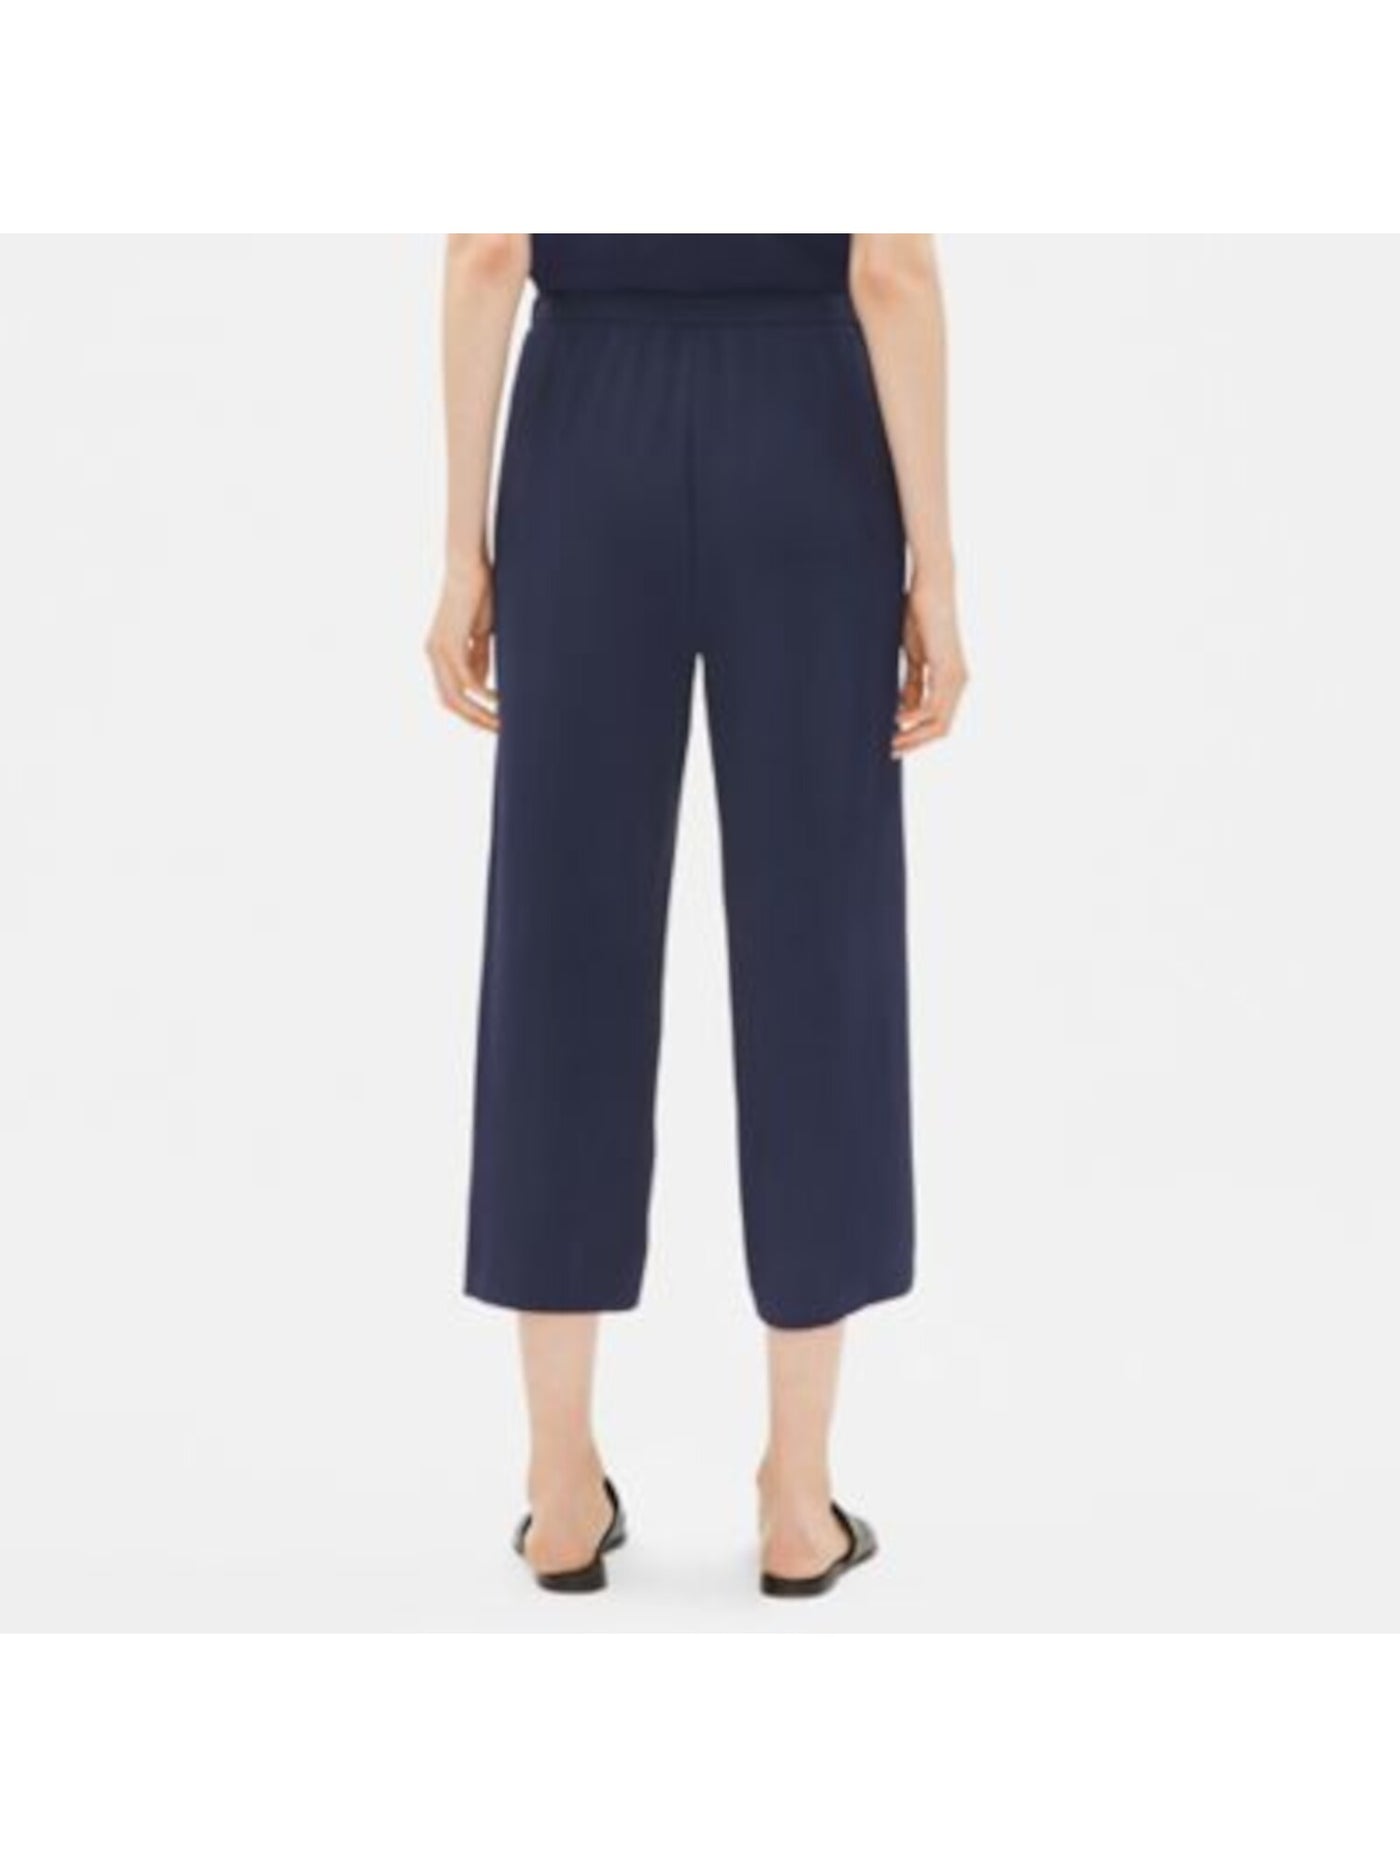 EILEEN FISHER Womens Navy Silk Cropped Pants XS